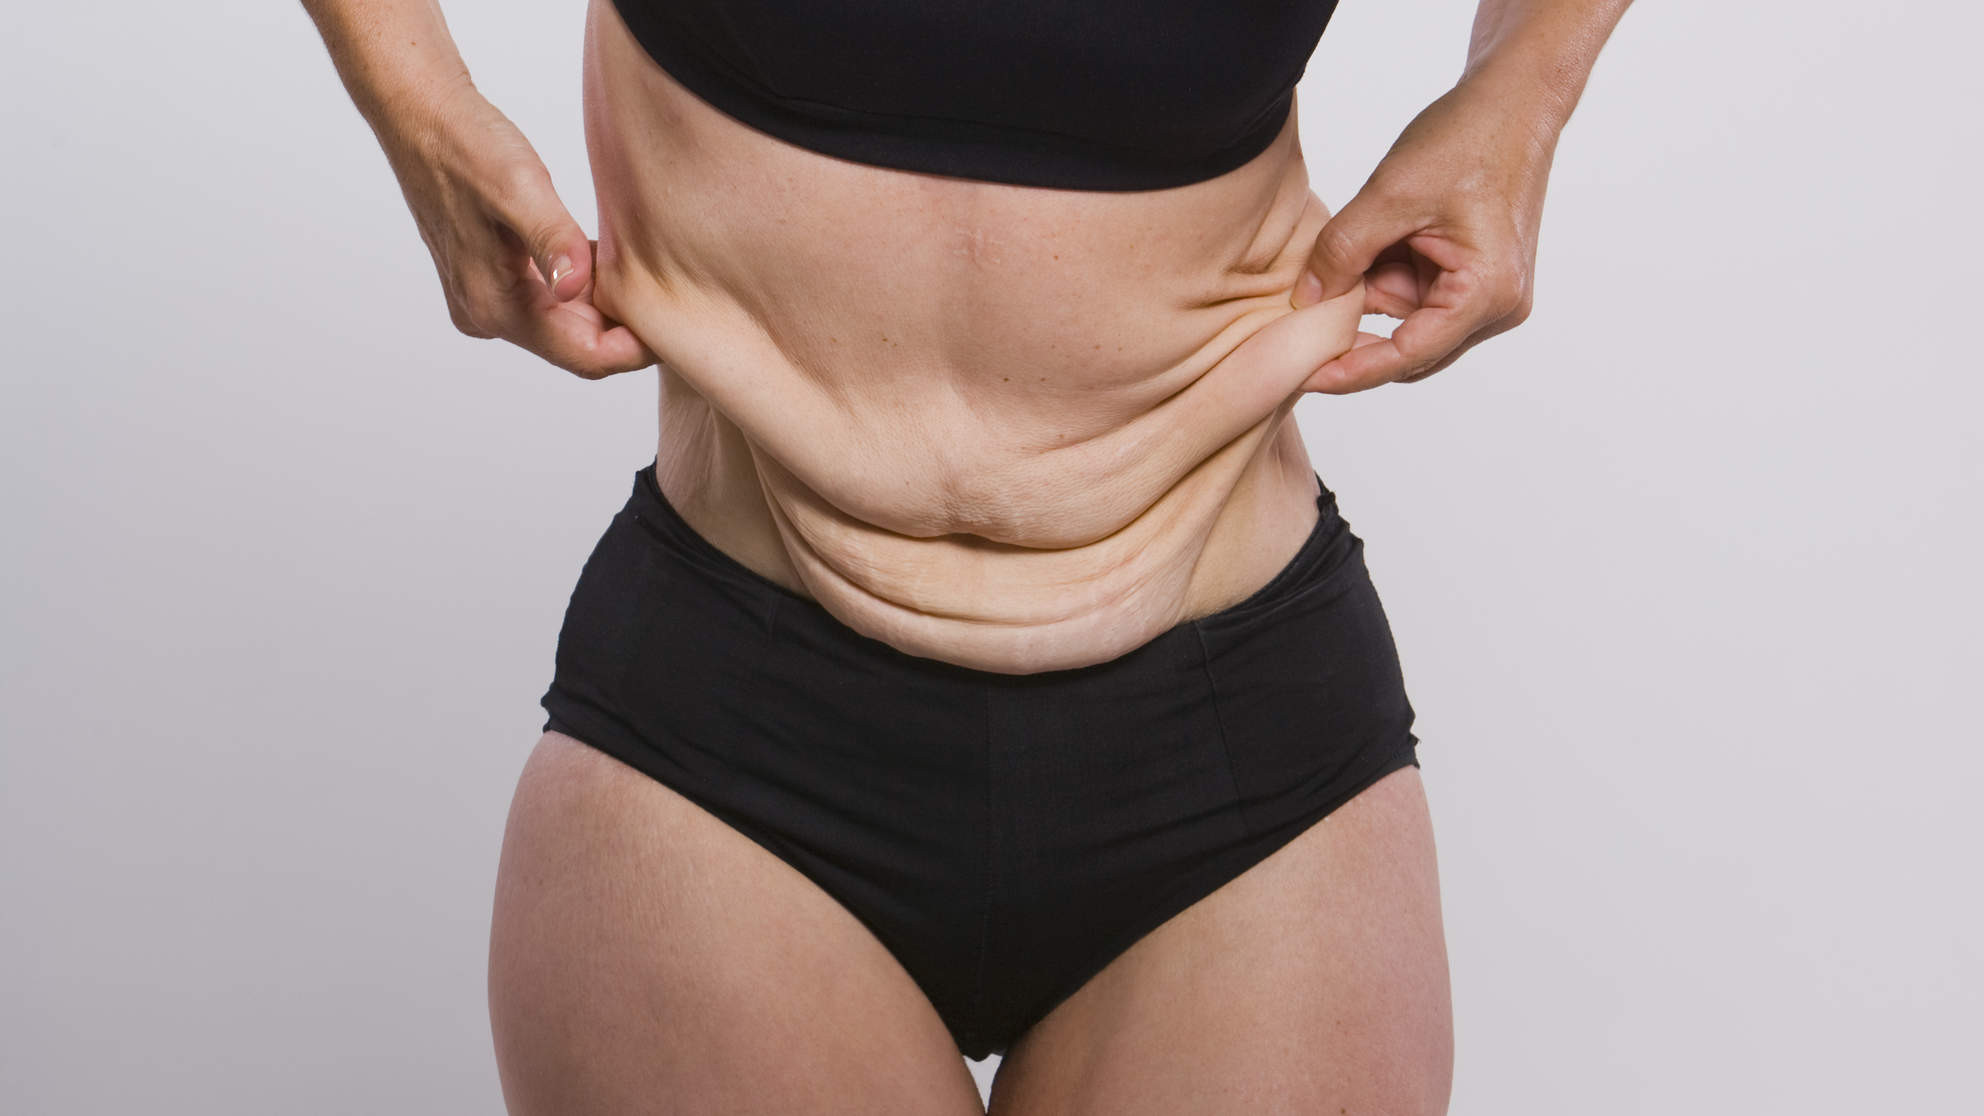 Sagging Skin After Weight Loss Exercise
 How To Get Rid of Loose Skin after Weight Loss